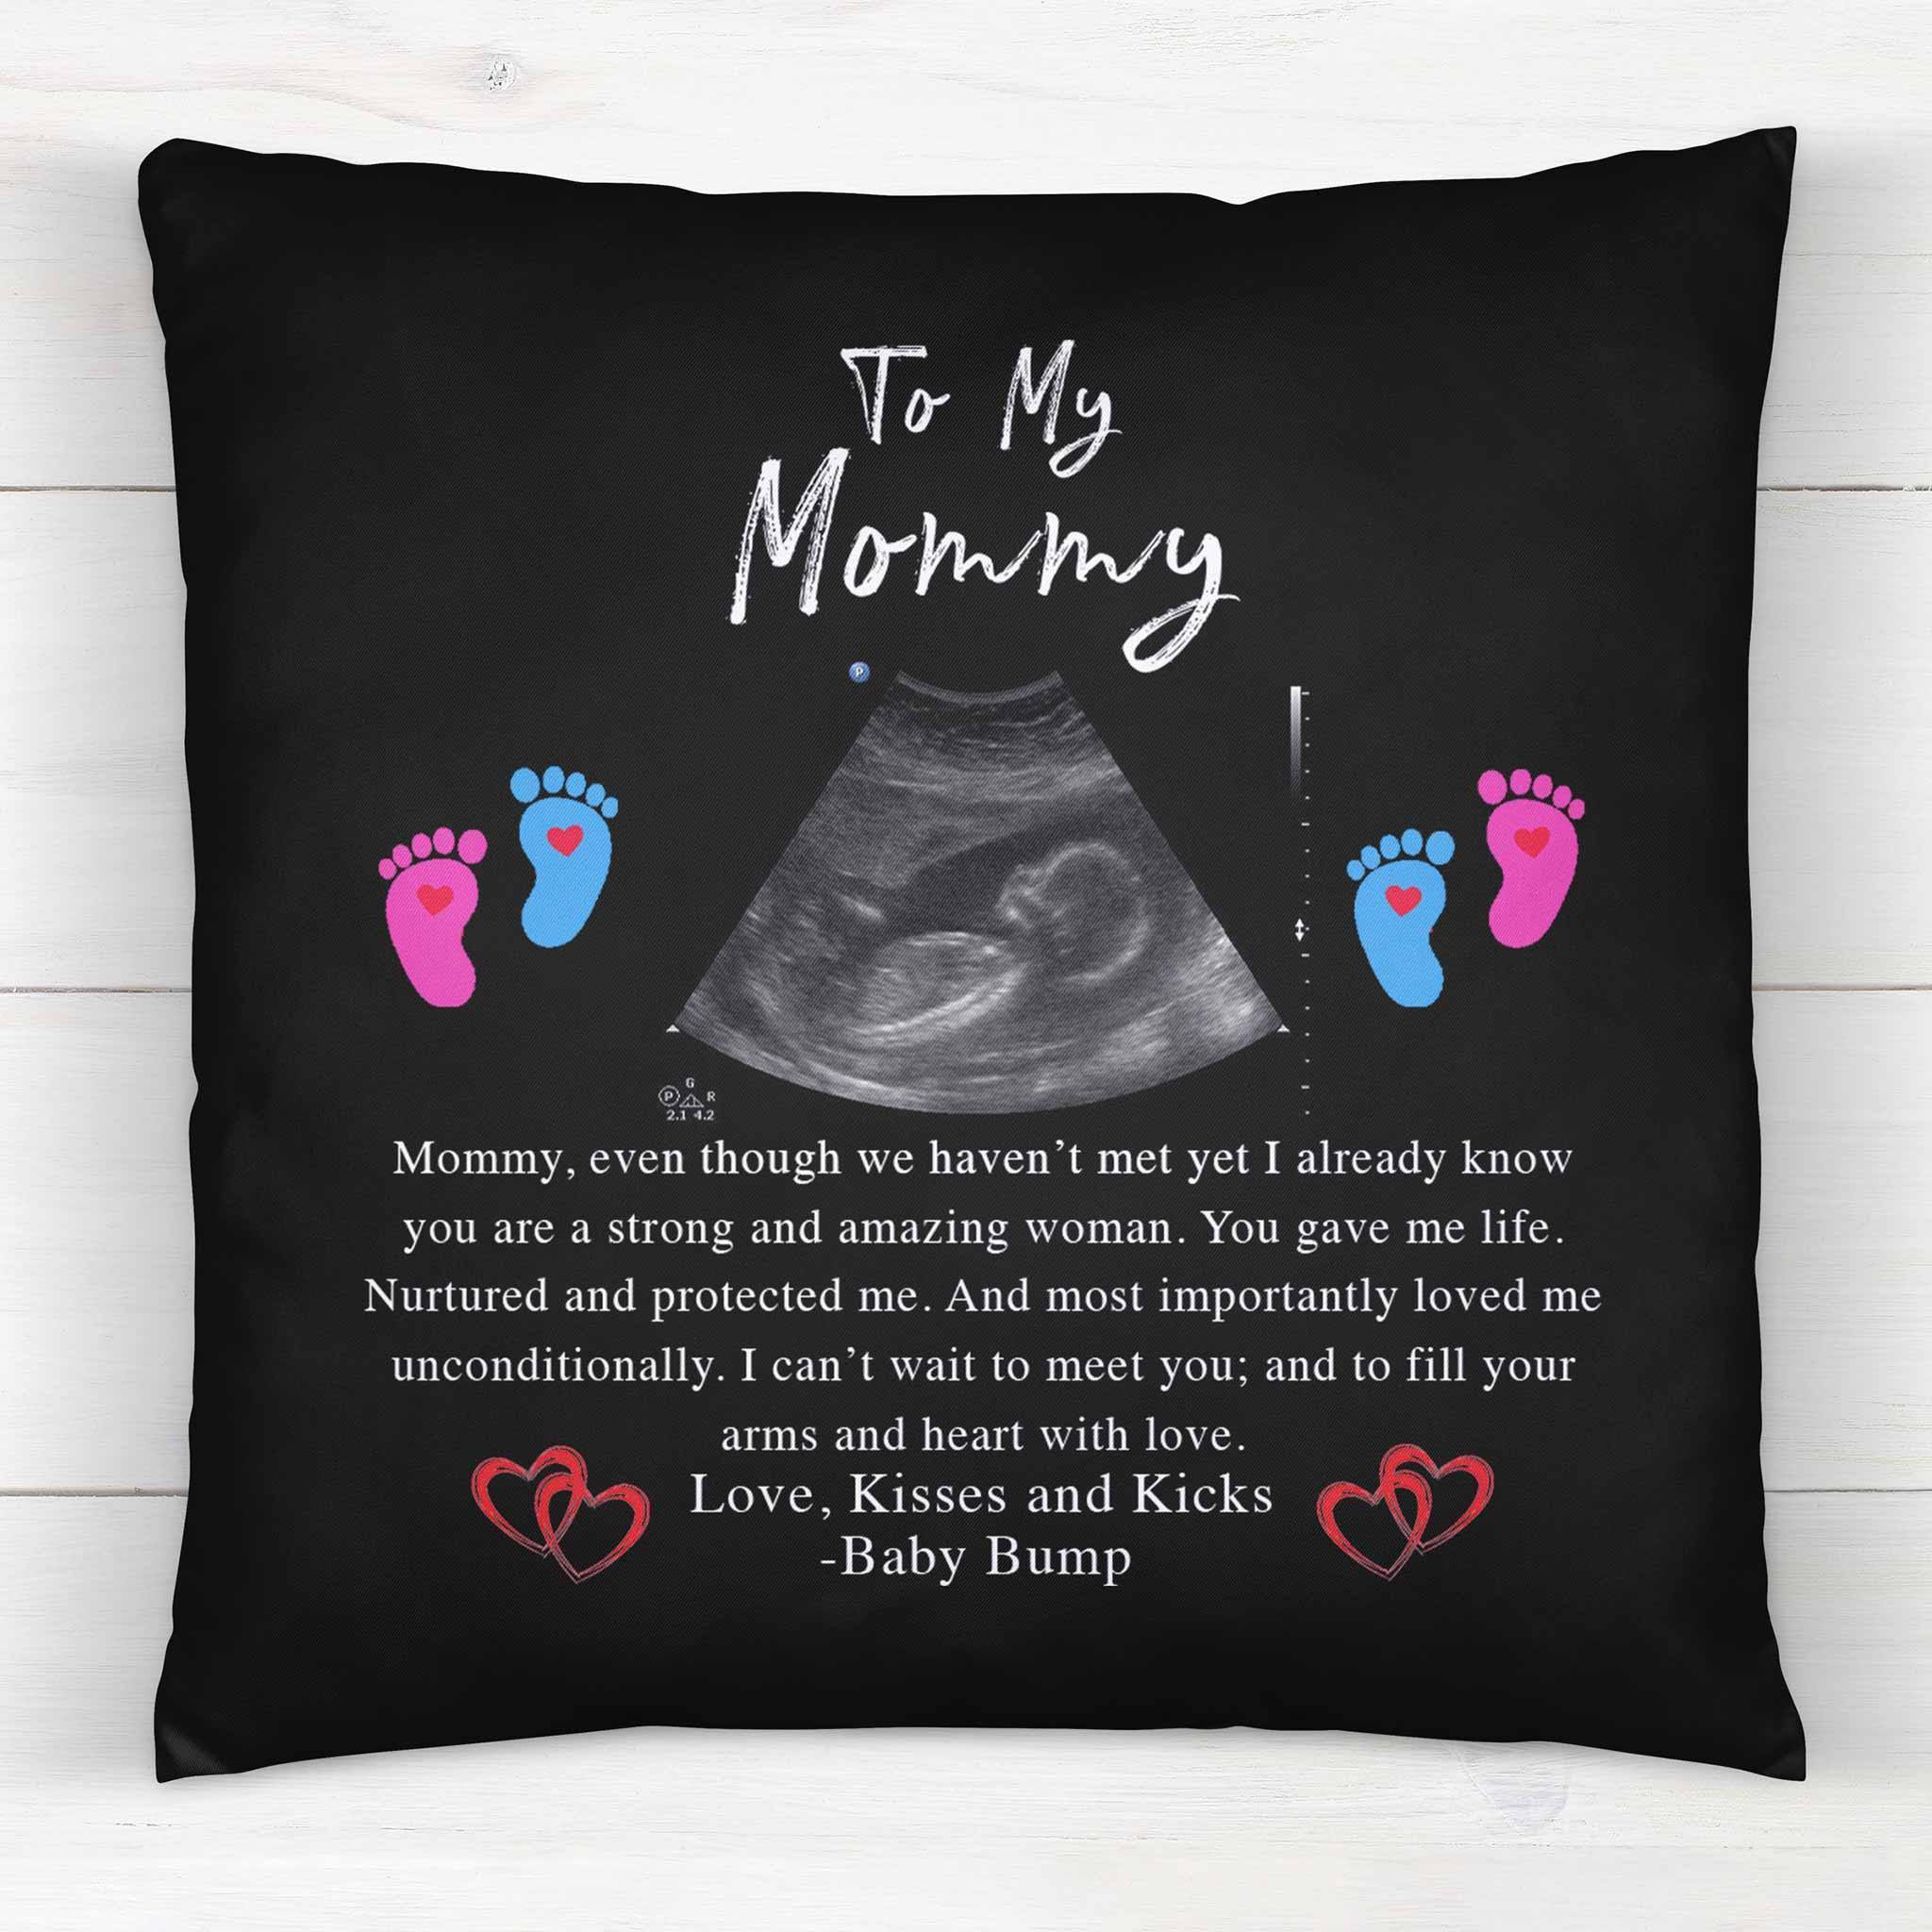 To My Mommy v1 Pillow With Personalized Sonogram Image And From TextCustomly Gifts